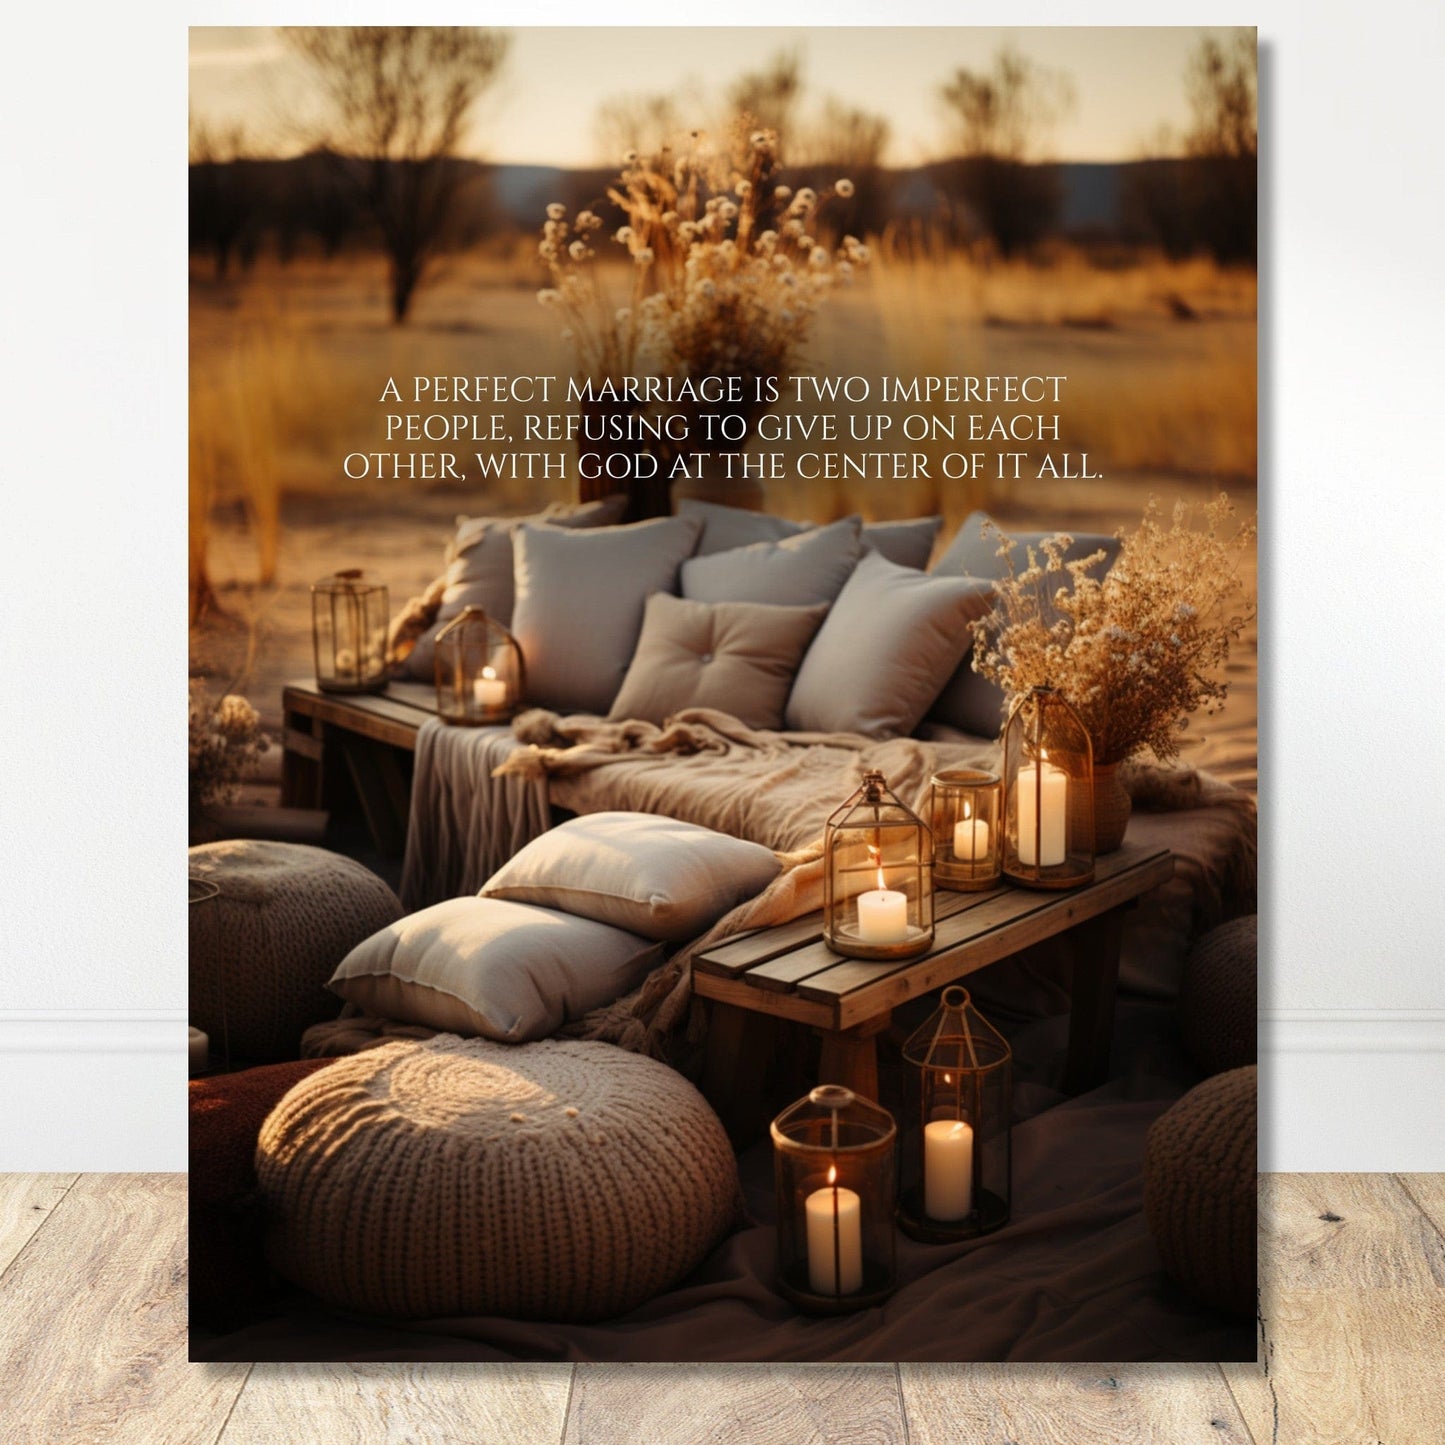 Coffee With My Father Print Material 40x50 cm / 16x20″ / Unframed / Unframed - Poster Only God-Centered Marriage - Custom Art